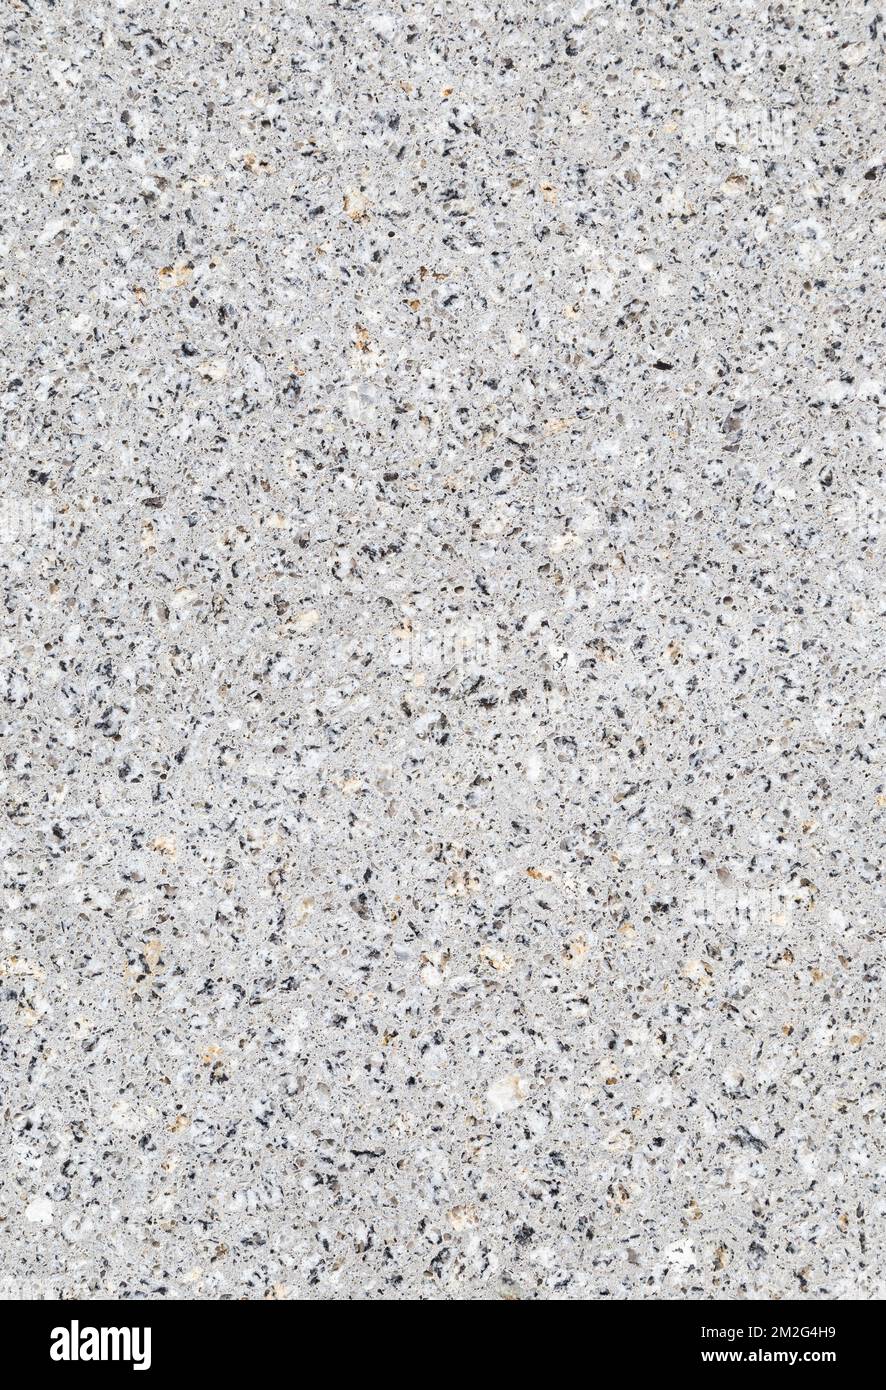 Close-up of a wall or flooring made of concrete or cement and small stones. Abstract full frame textured background, copy space. Stock Photo